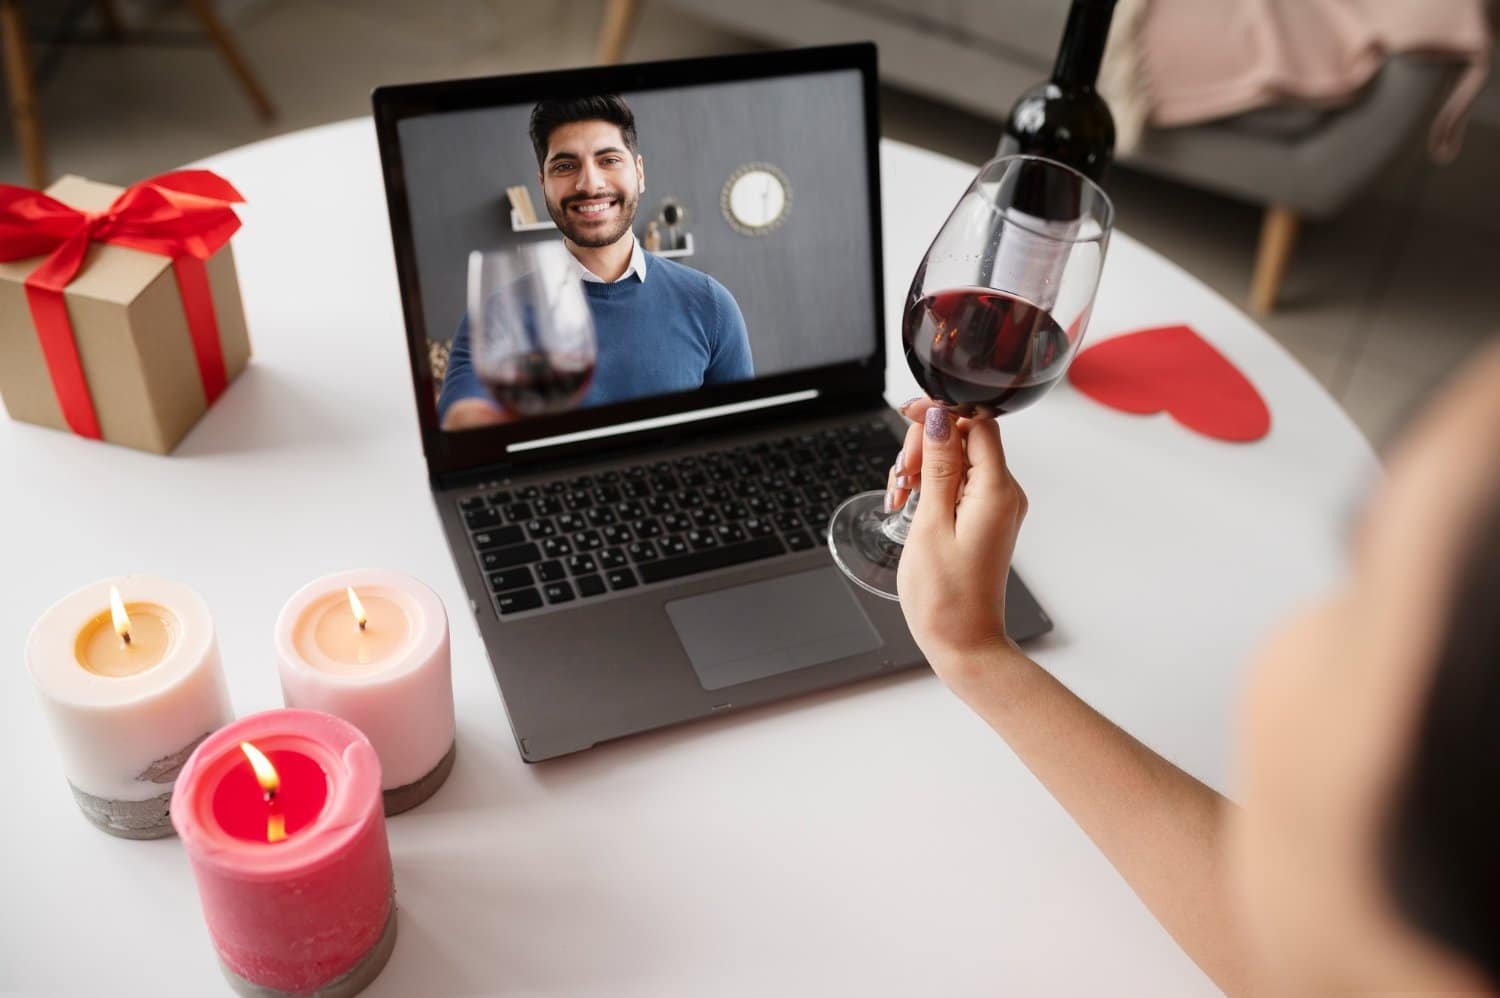 The Impact of Video Chats on Online Dating